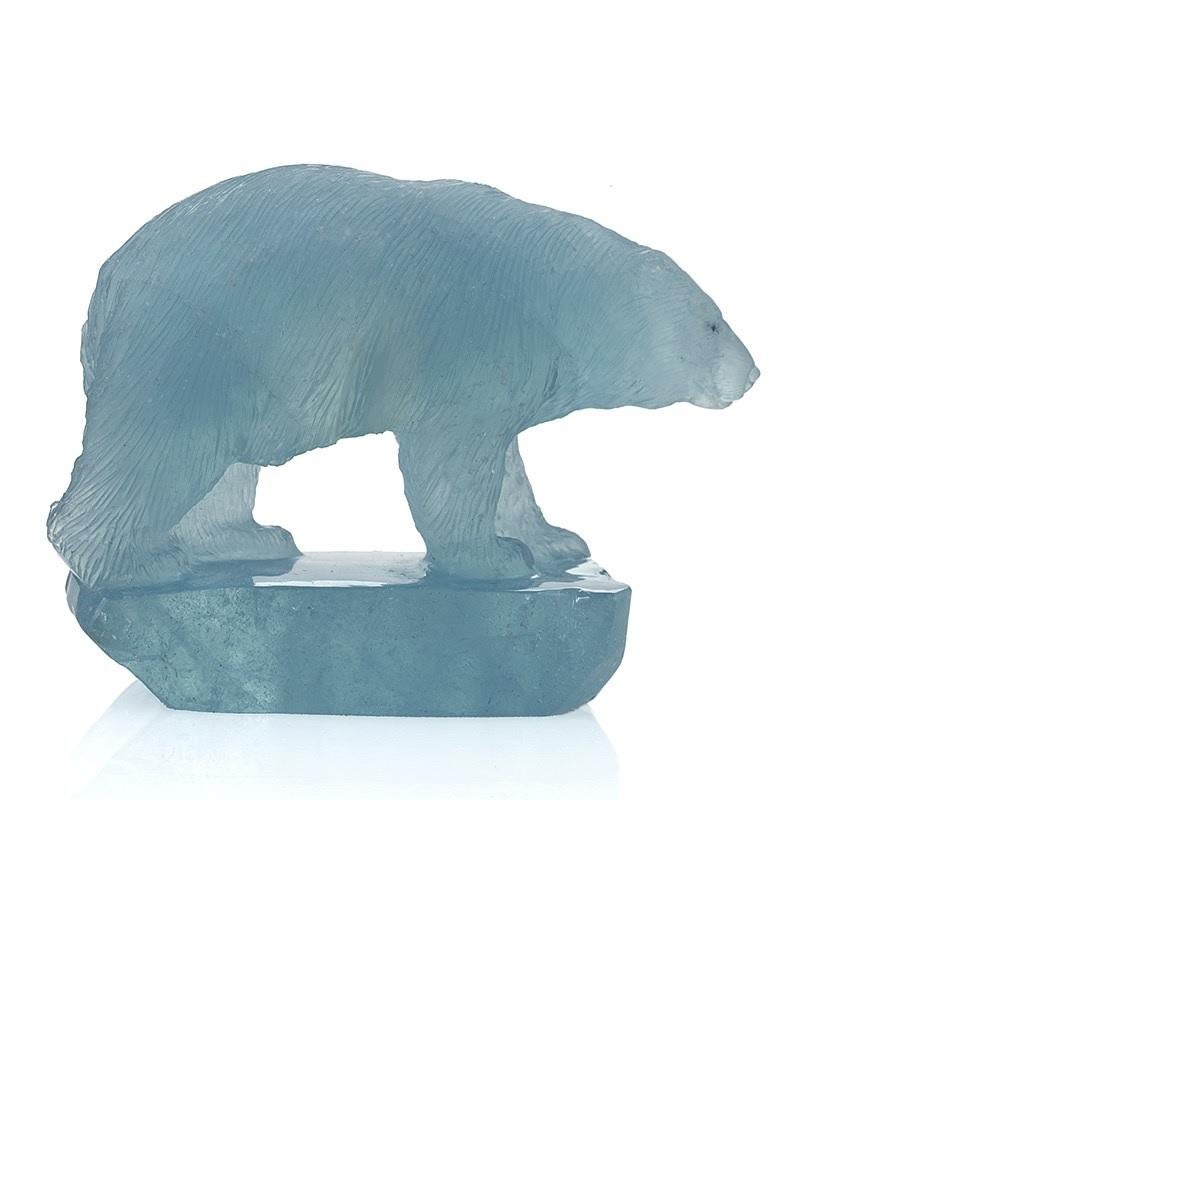 A carved aquamarine polar bear sculpture in miniature by famed gem carver Gerd Dreher. Gerd Dreher is a German from the Idar-Oberstein region. His family has been carving gems for five generations.   

The bear's coat has detailed textured carving.